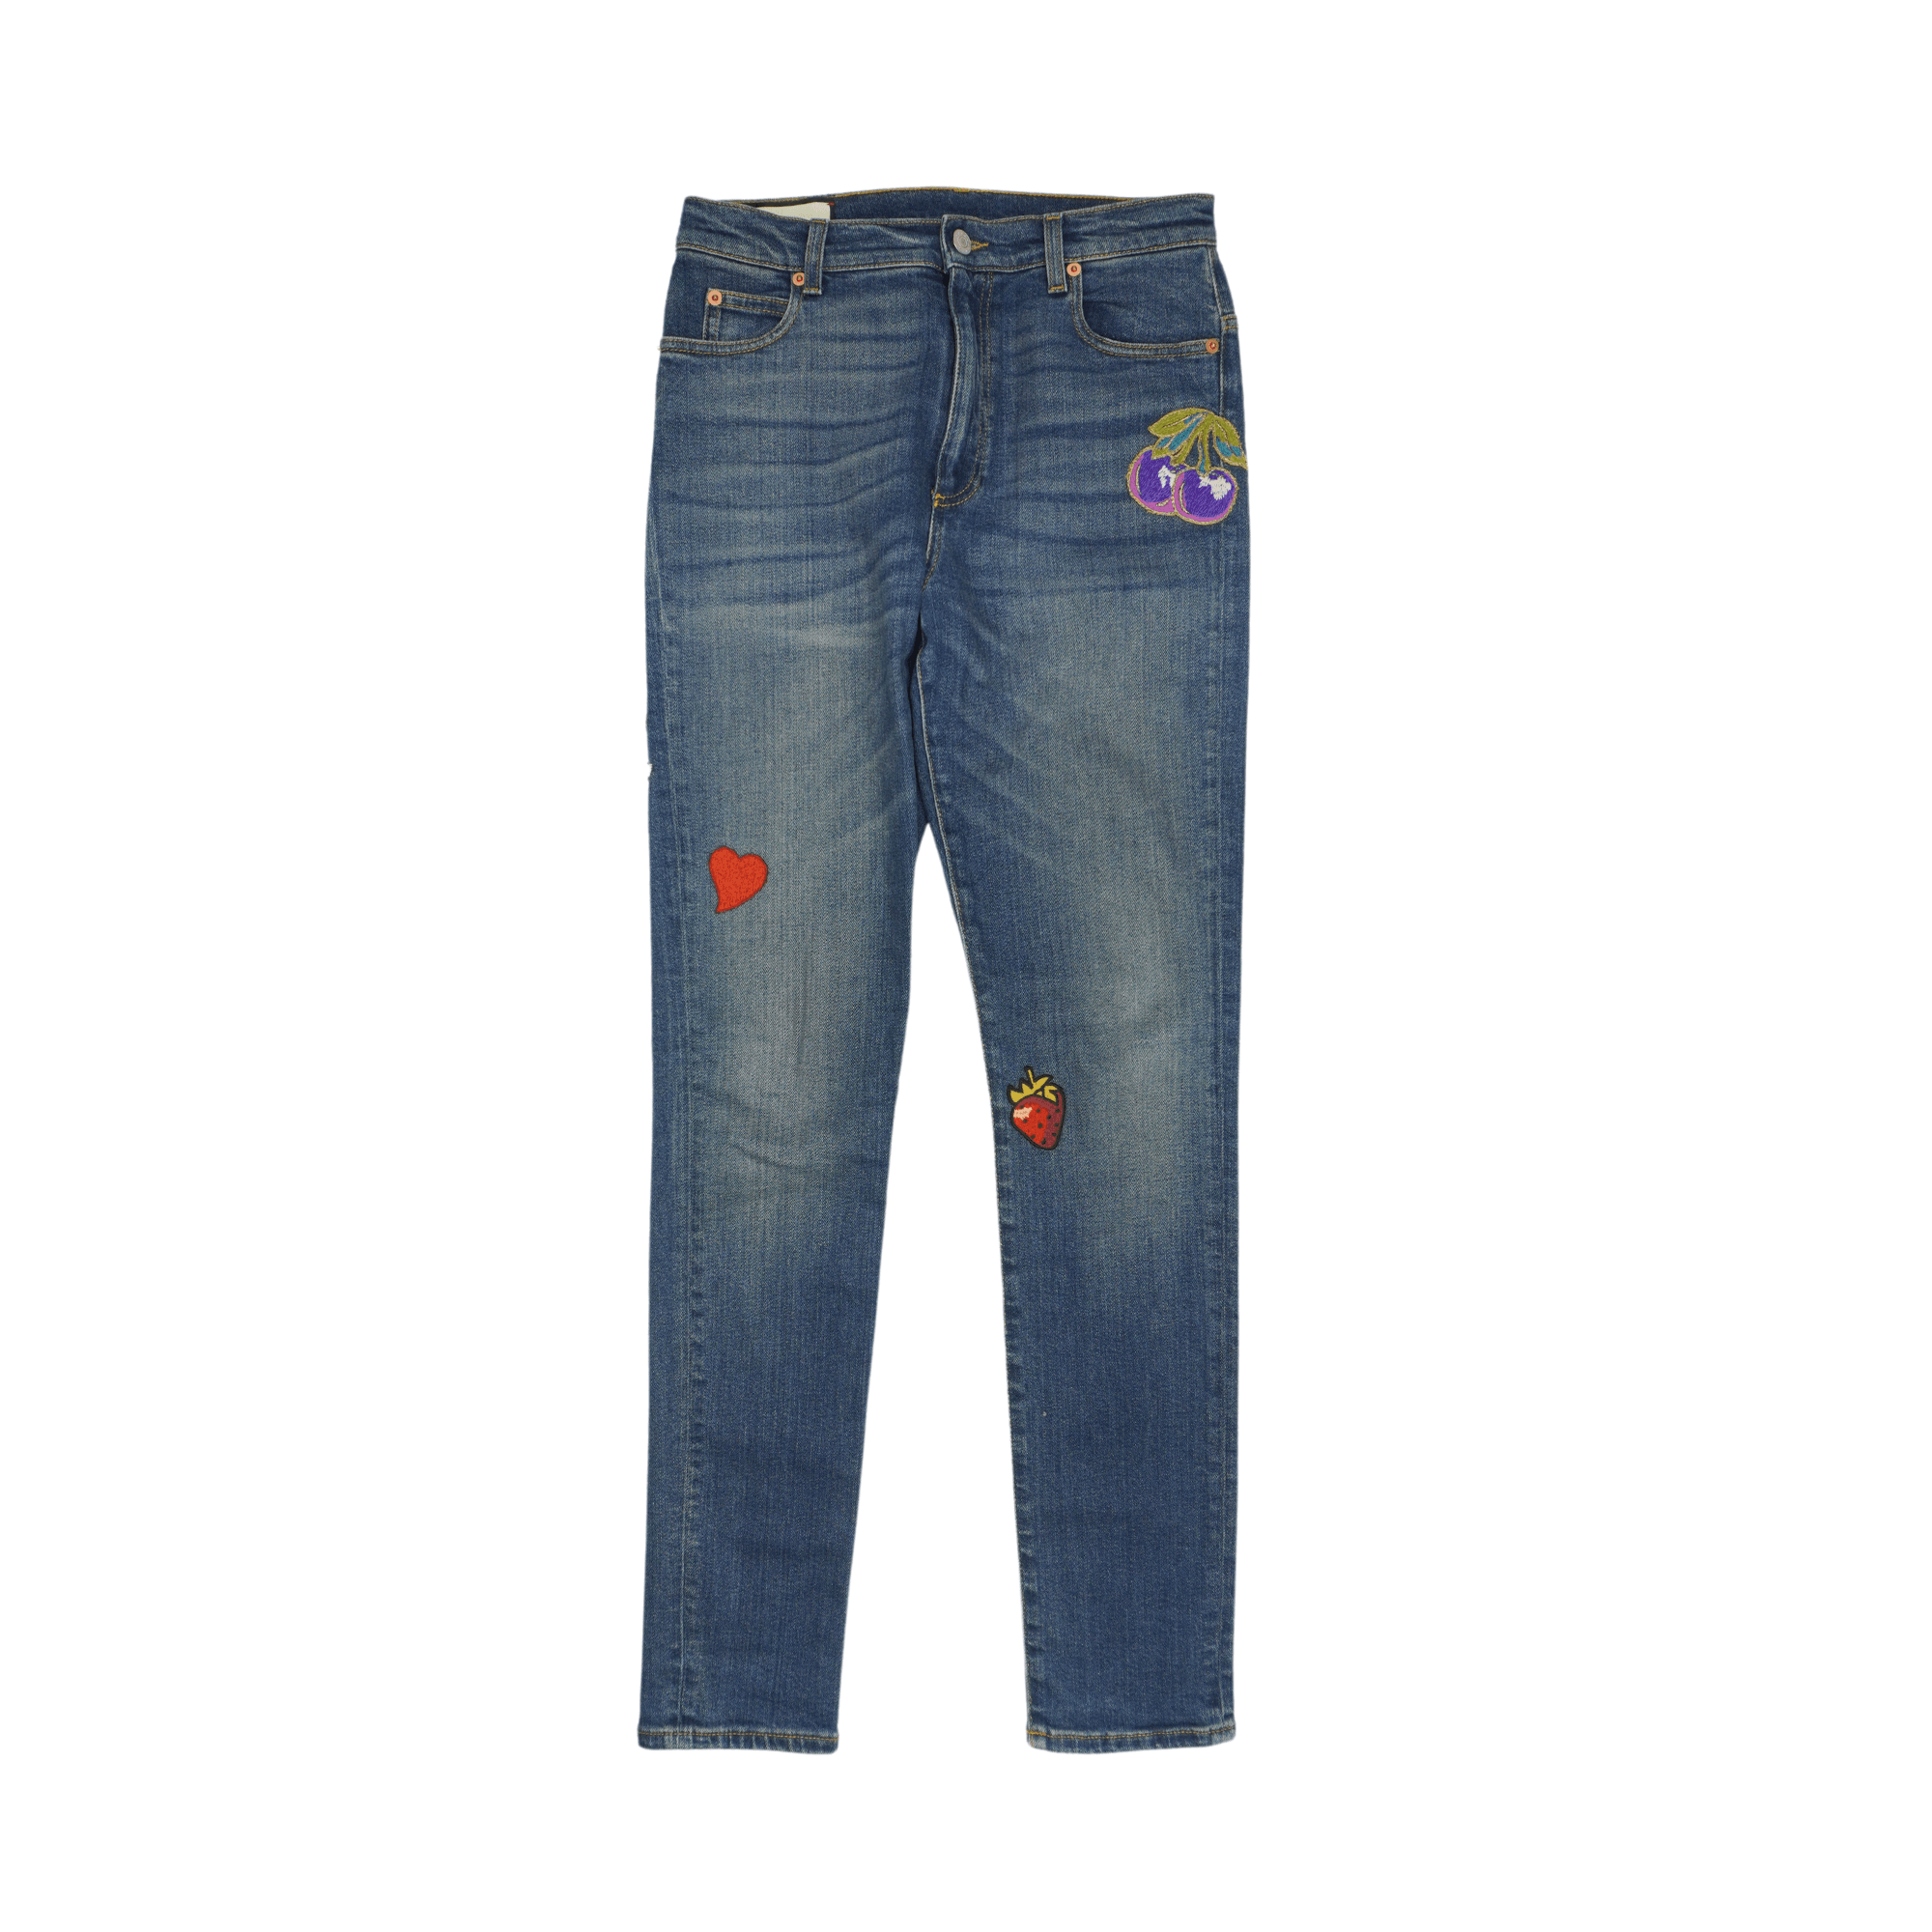 Gucci Jeans - Women's 28 - Fashionably Yours